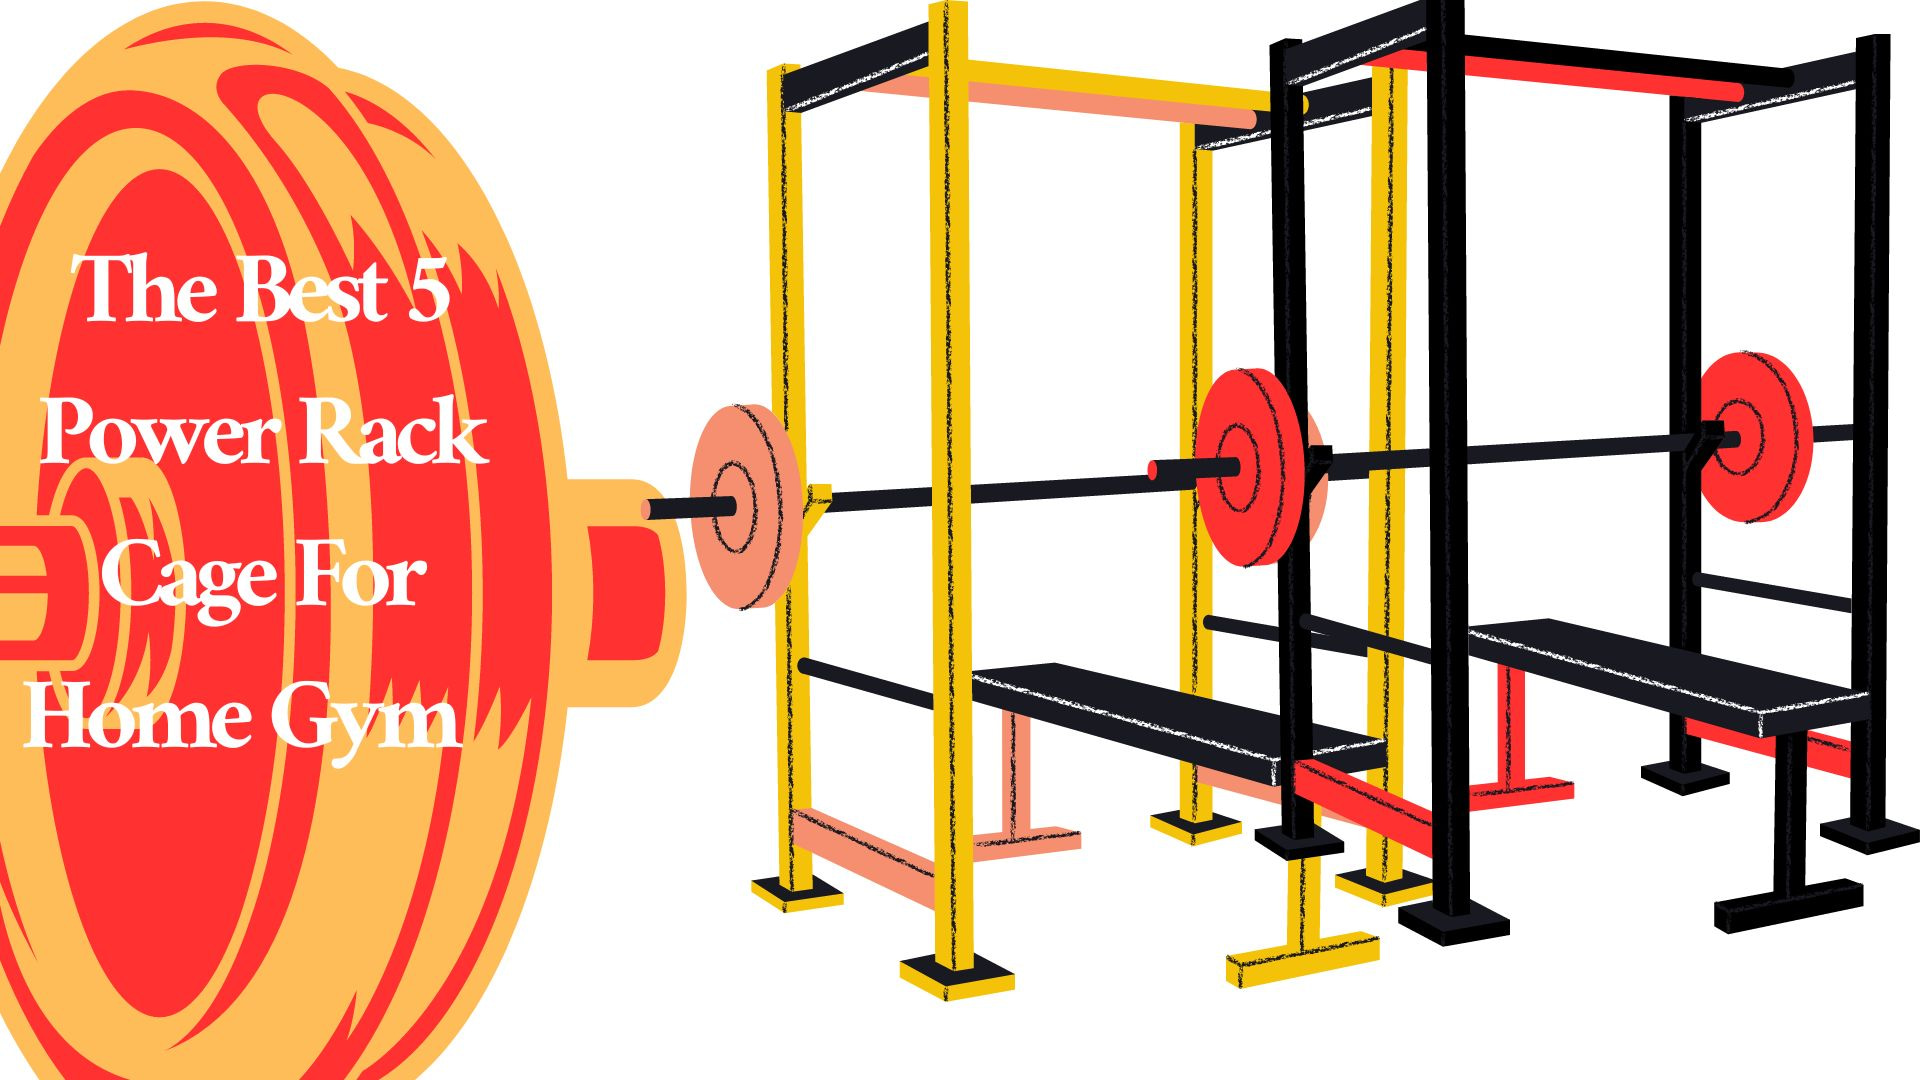 The Best 5 Power Rack Cage For Home Gym